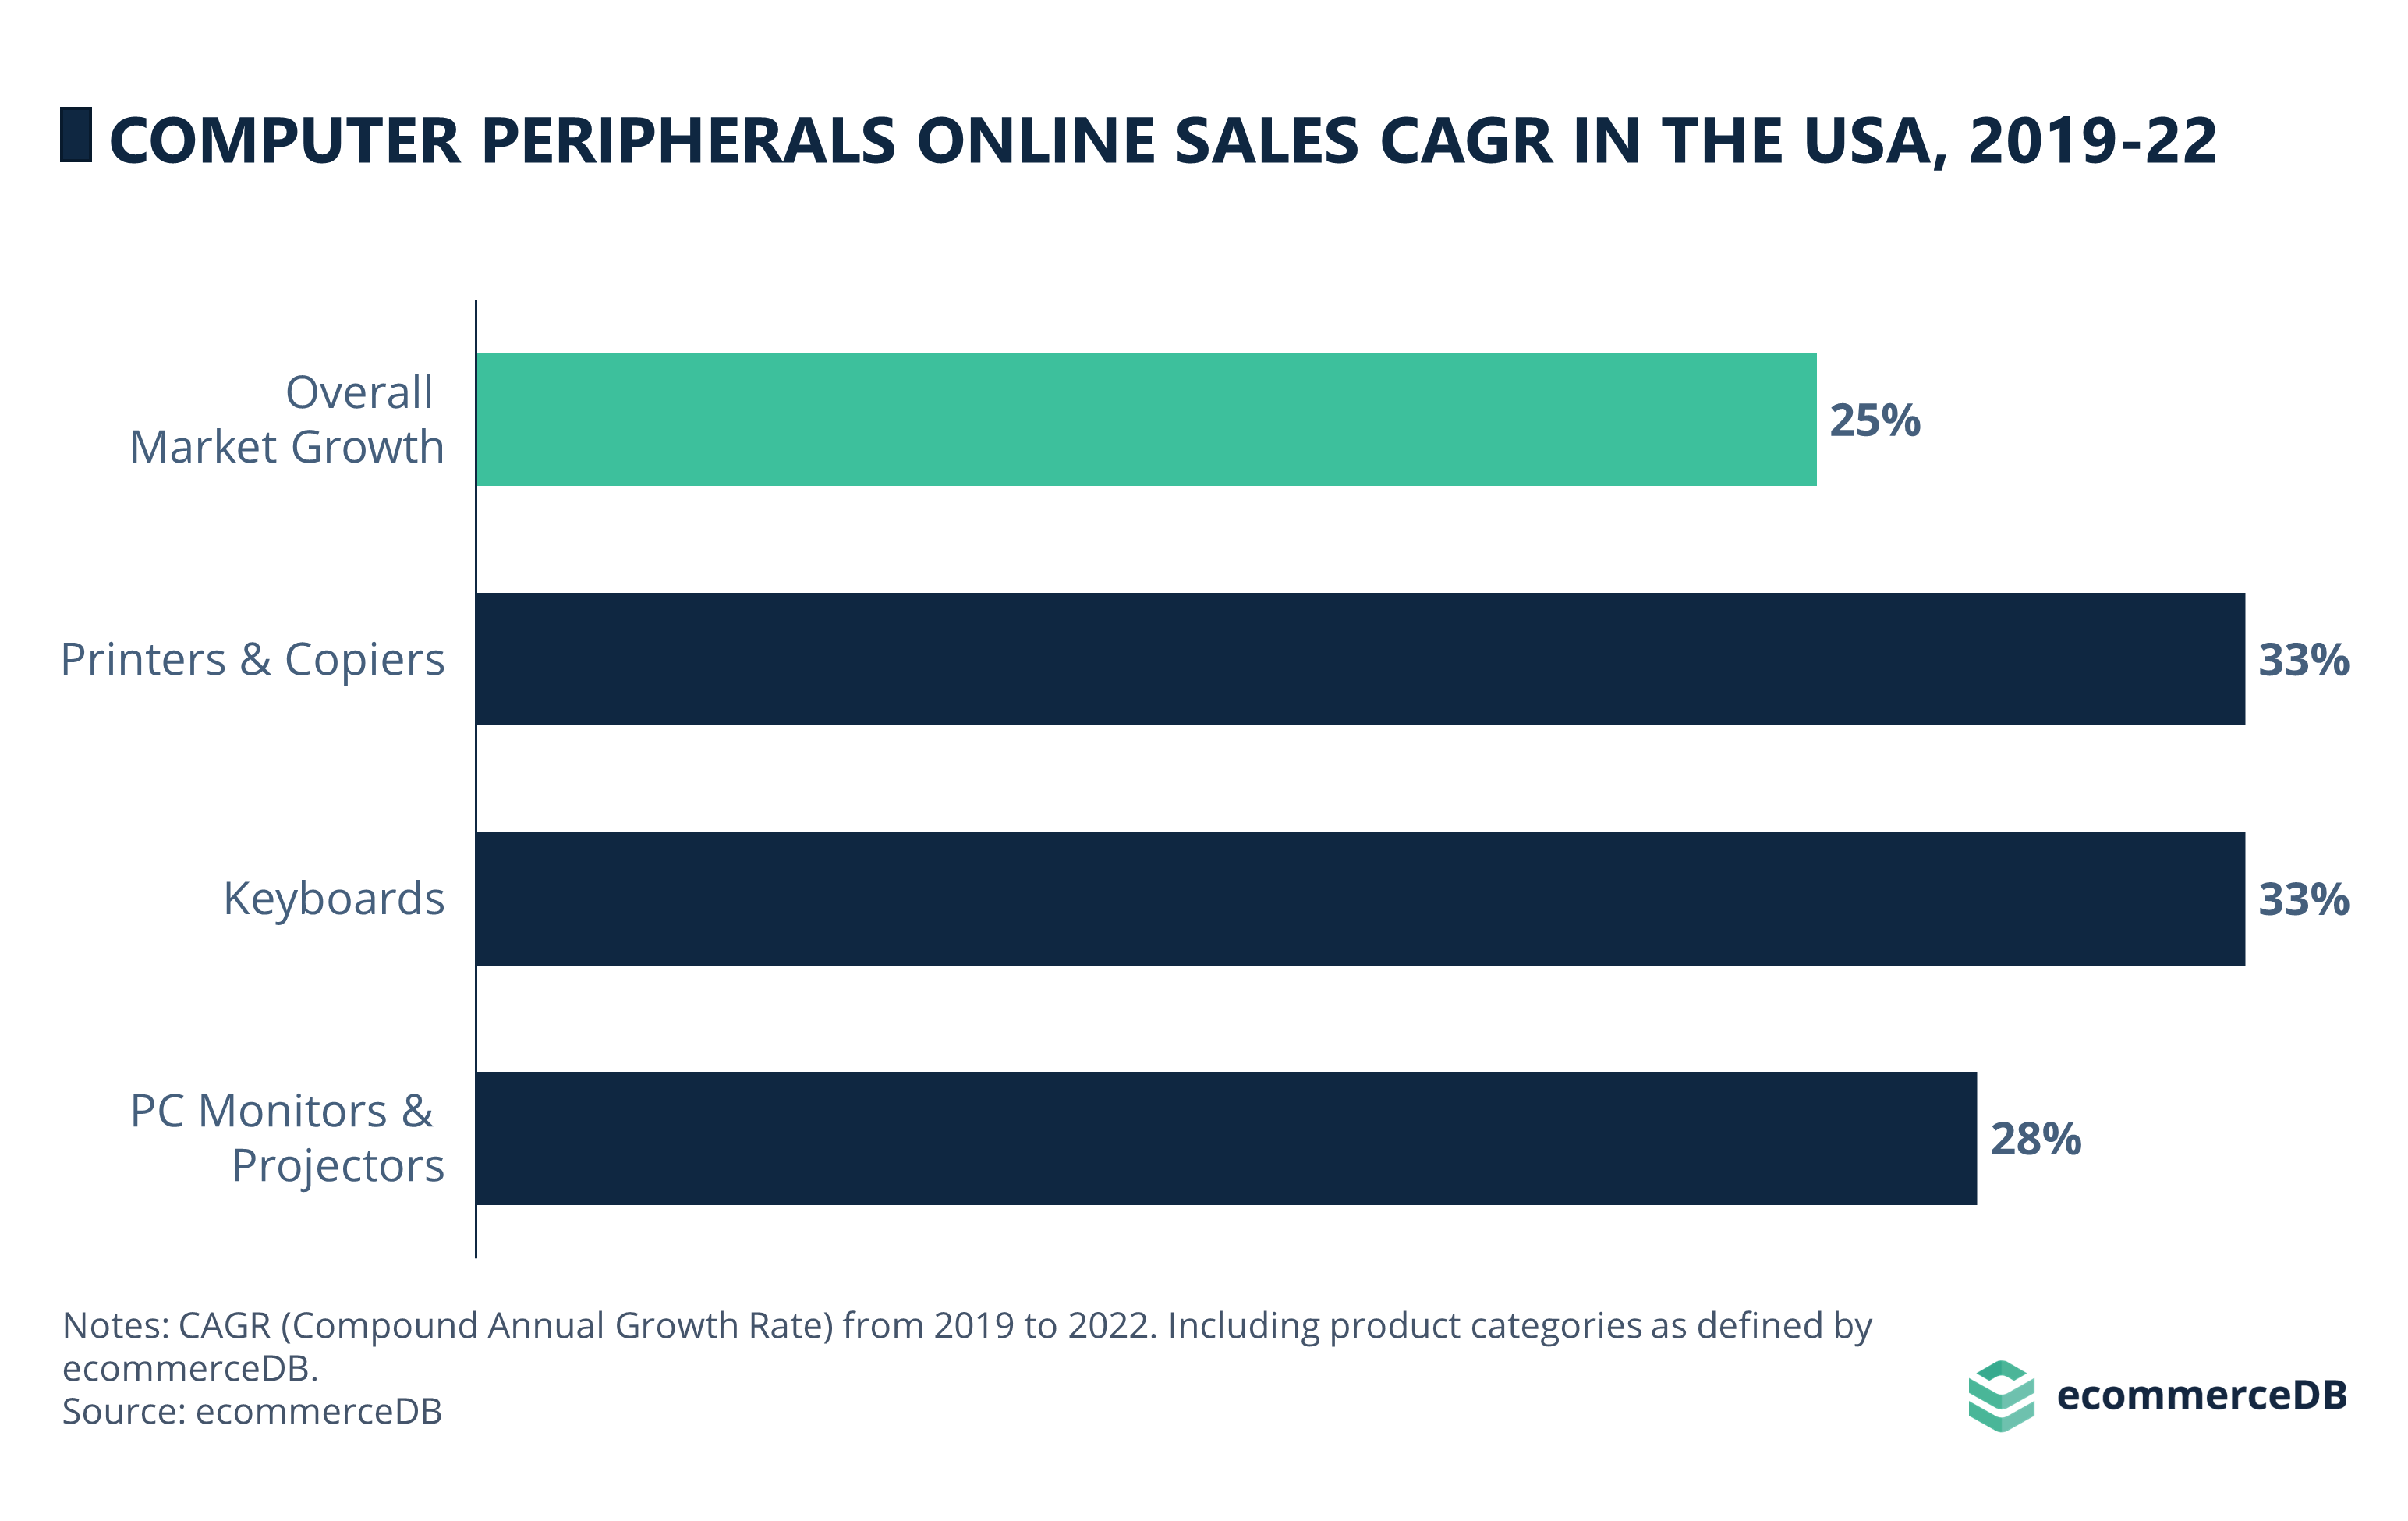 Computer Peripherals Online Sales CAGR (2019-2022) in the U.S.